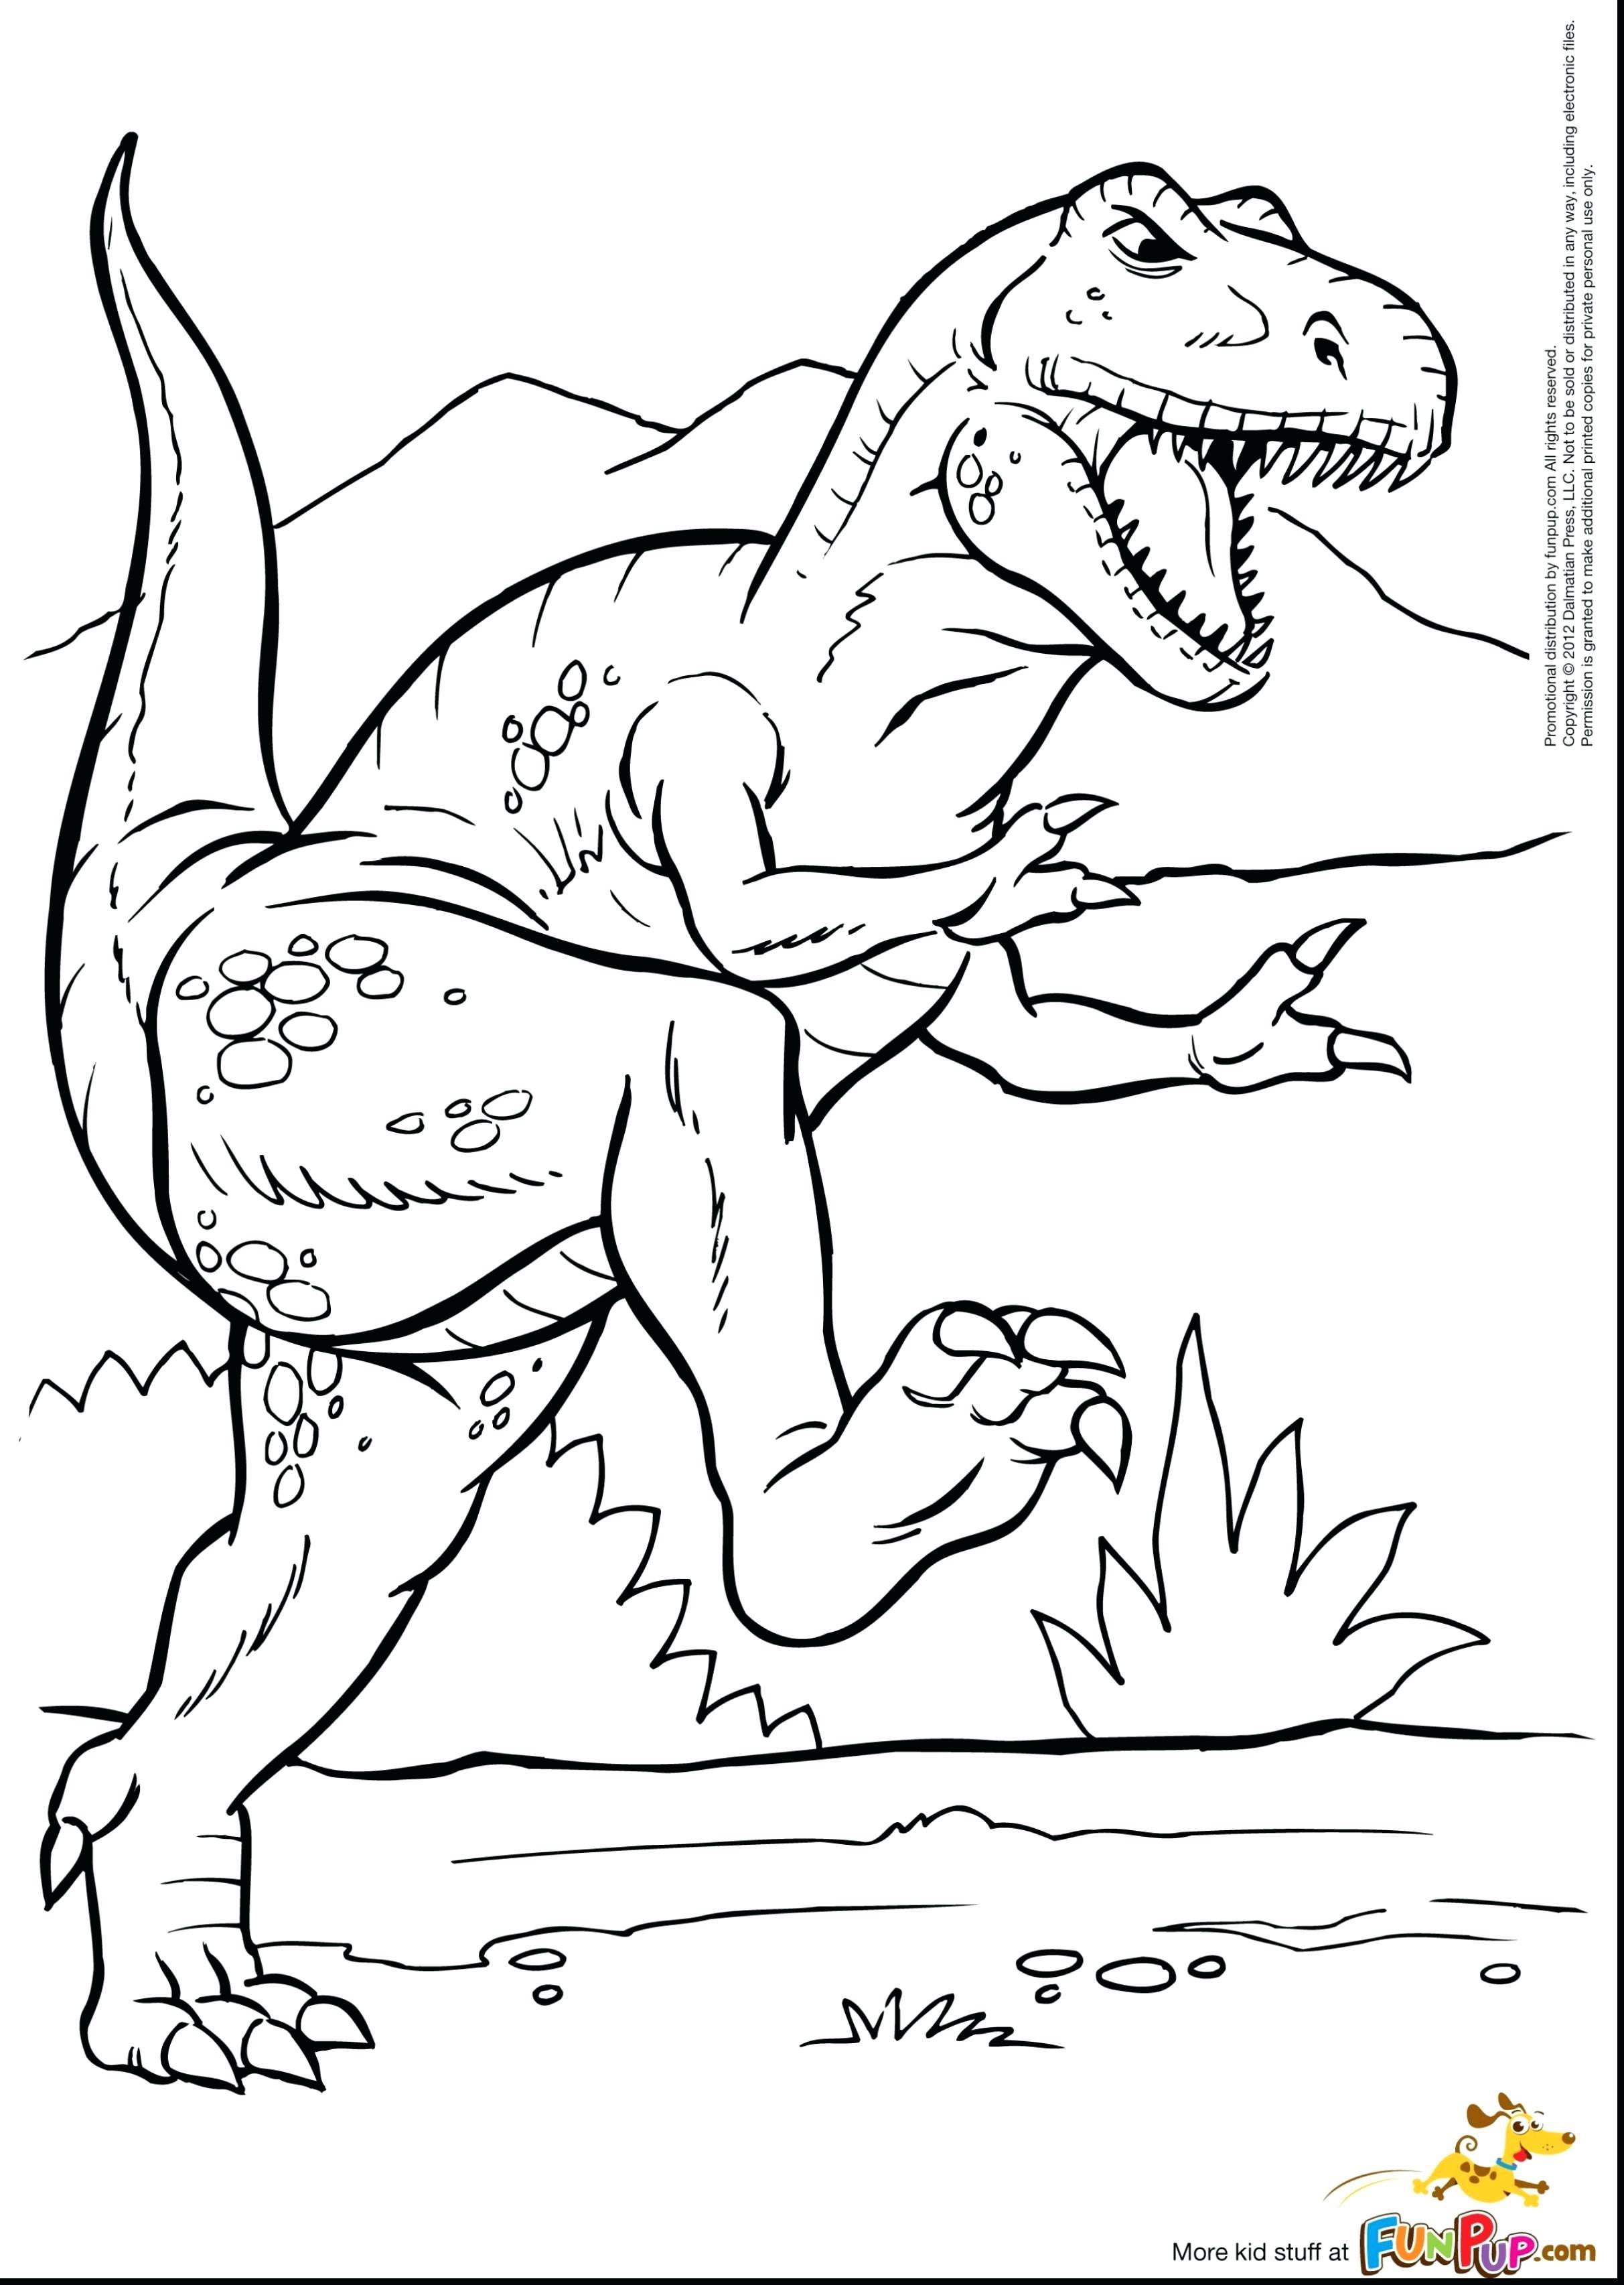 Lego T Rex Coloring Pages Wallpaper